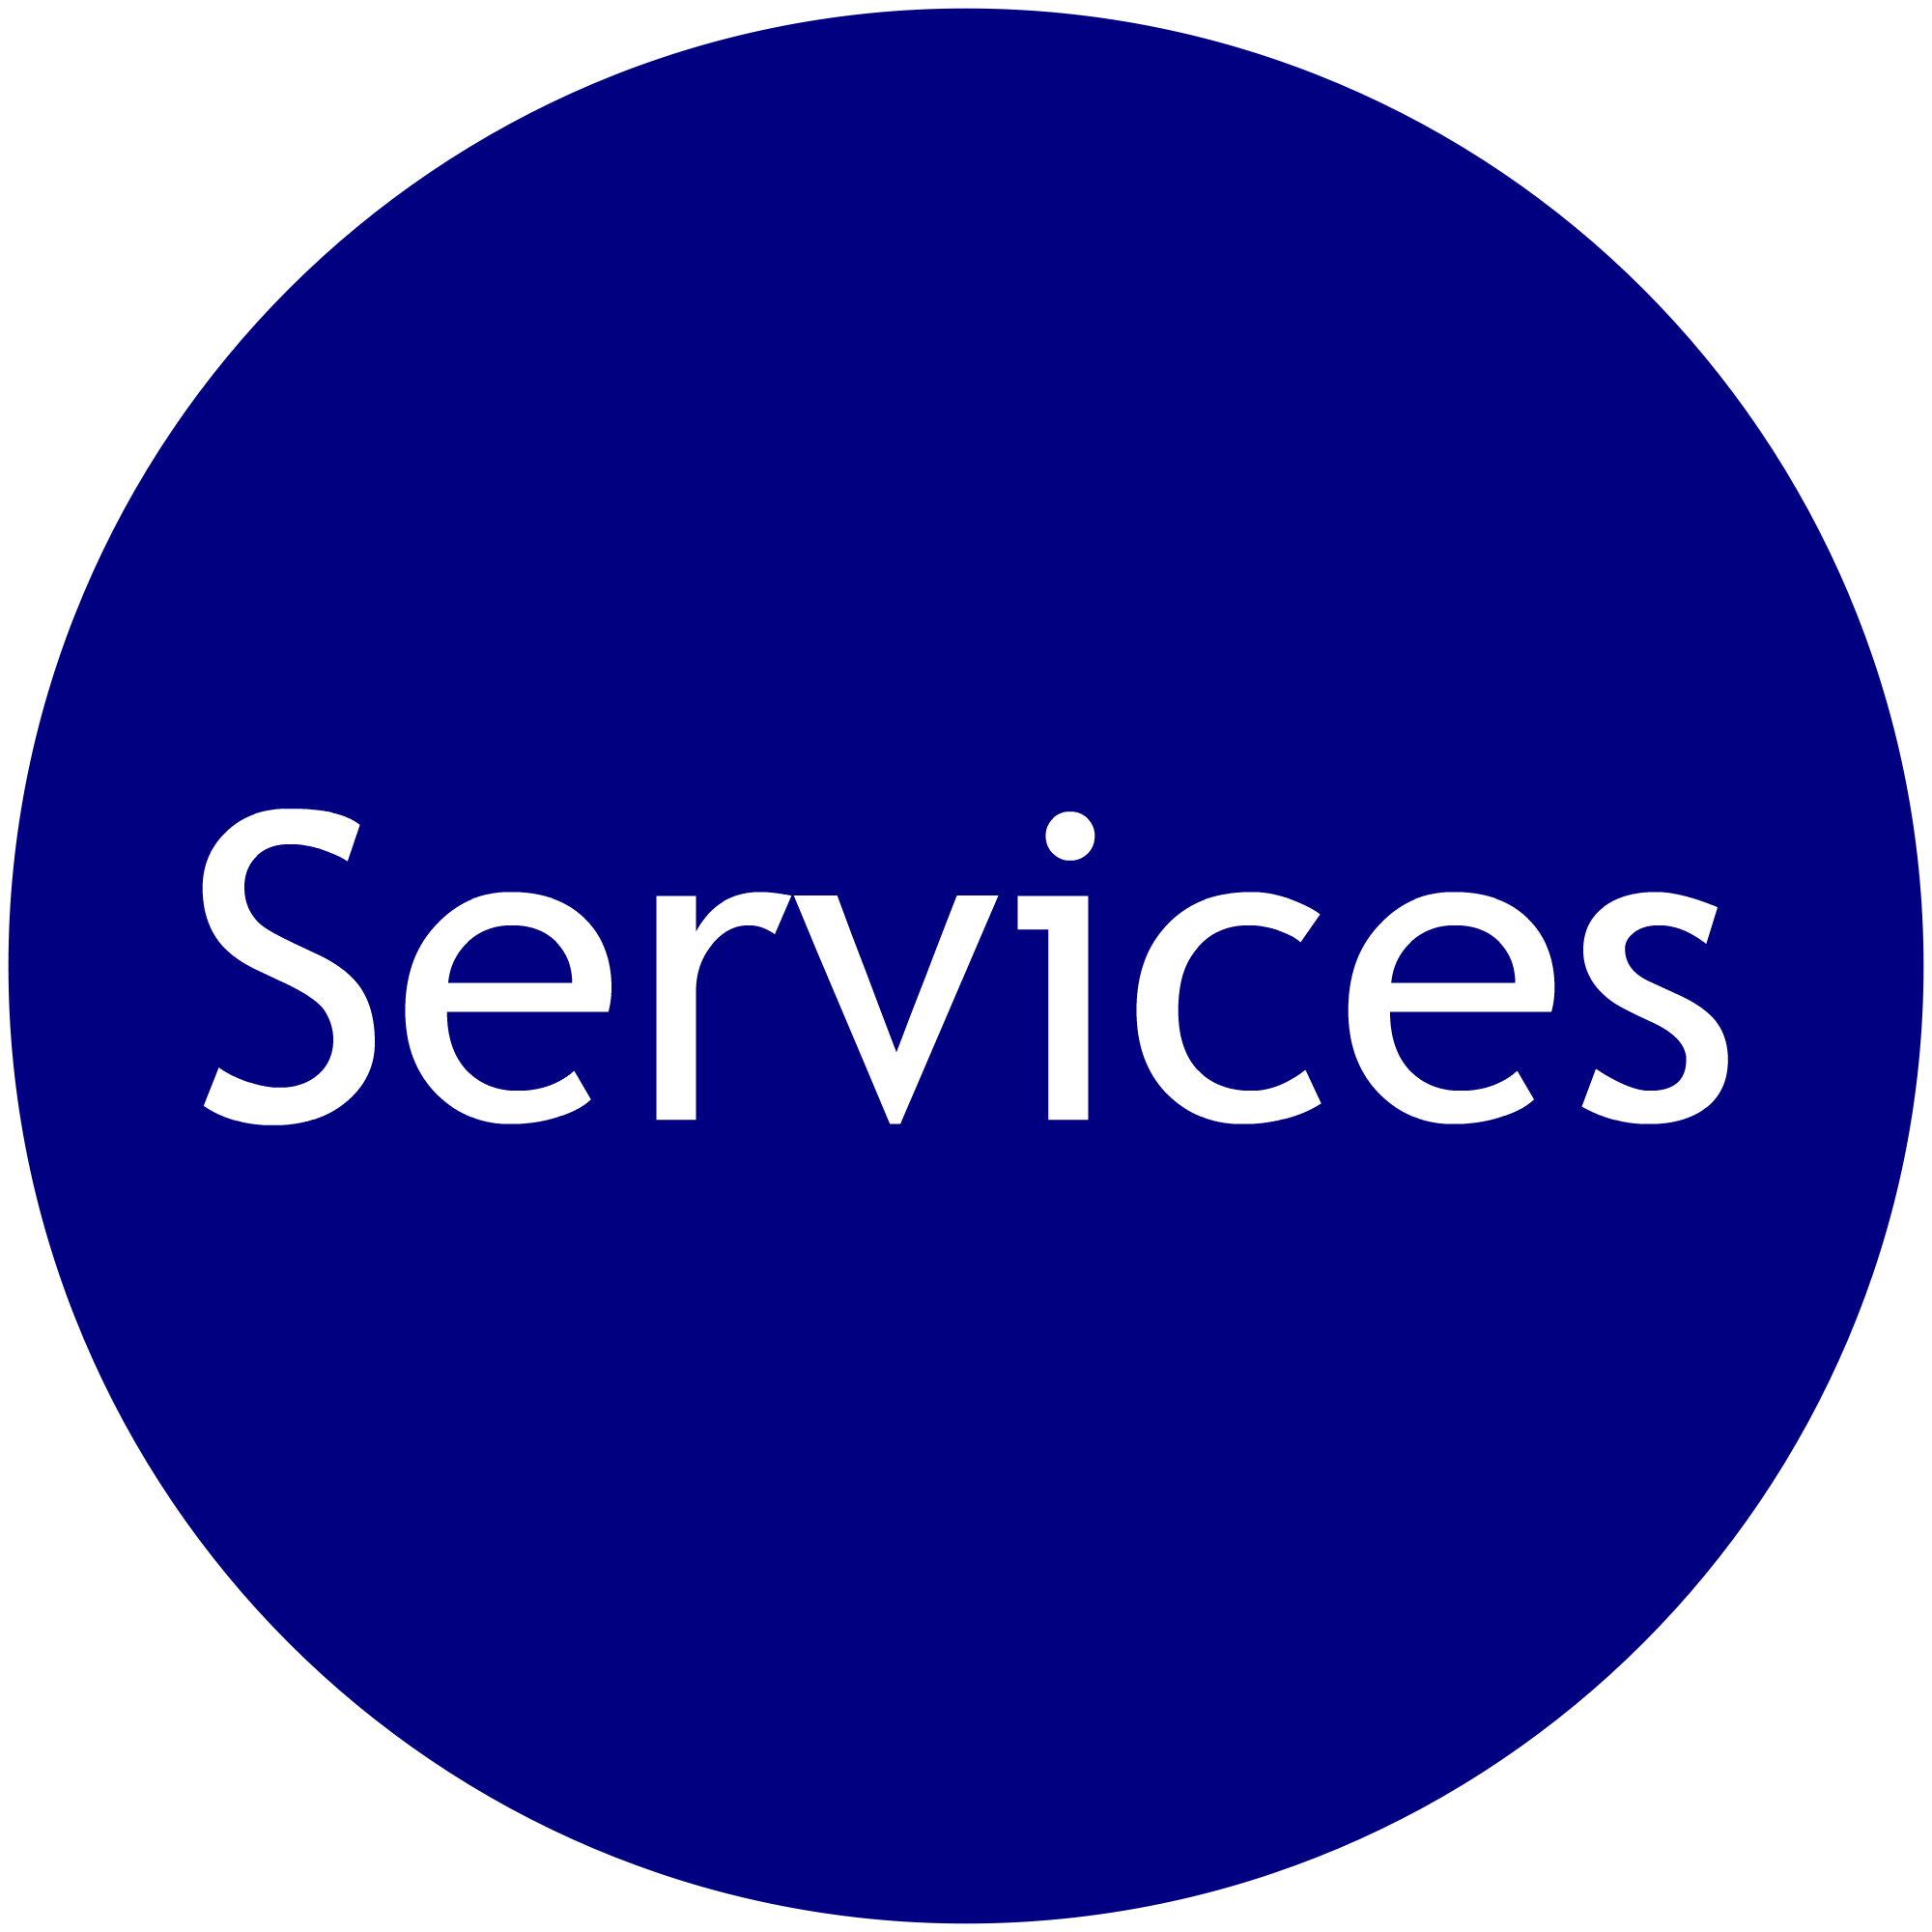 A blue circle with the word services written in it.